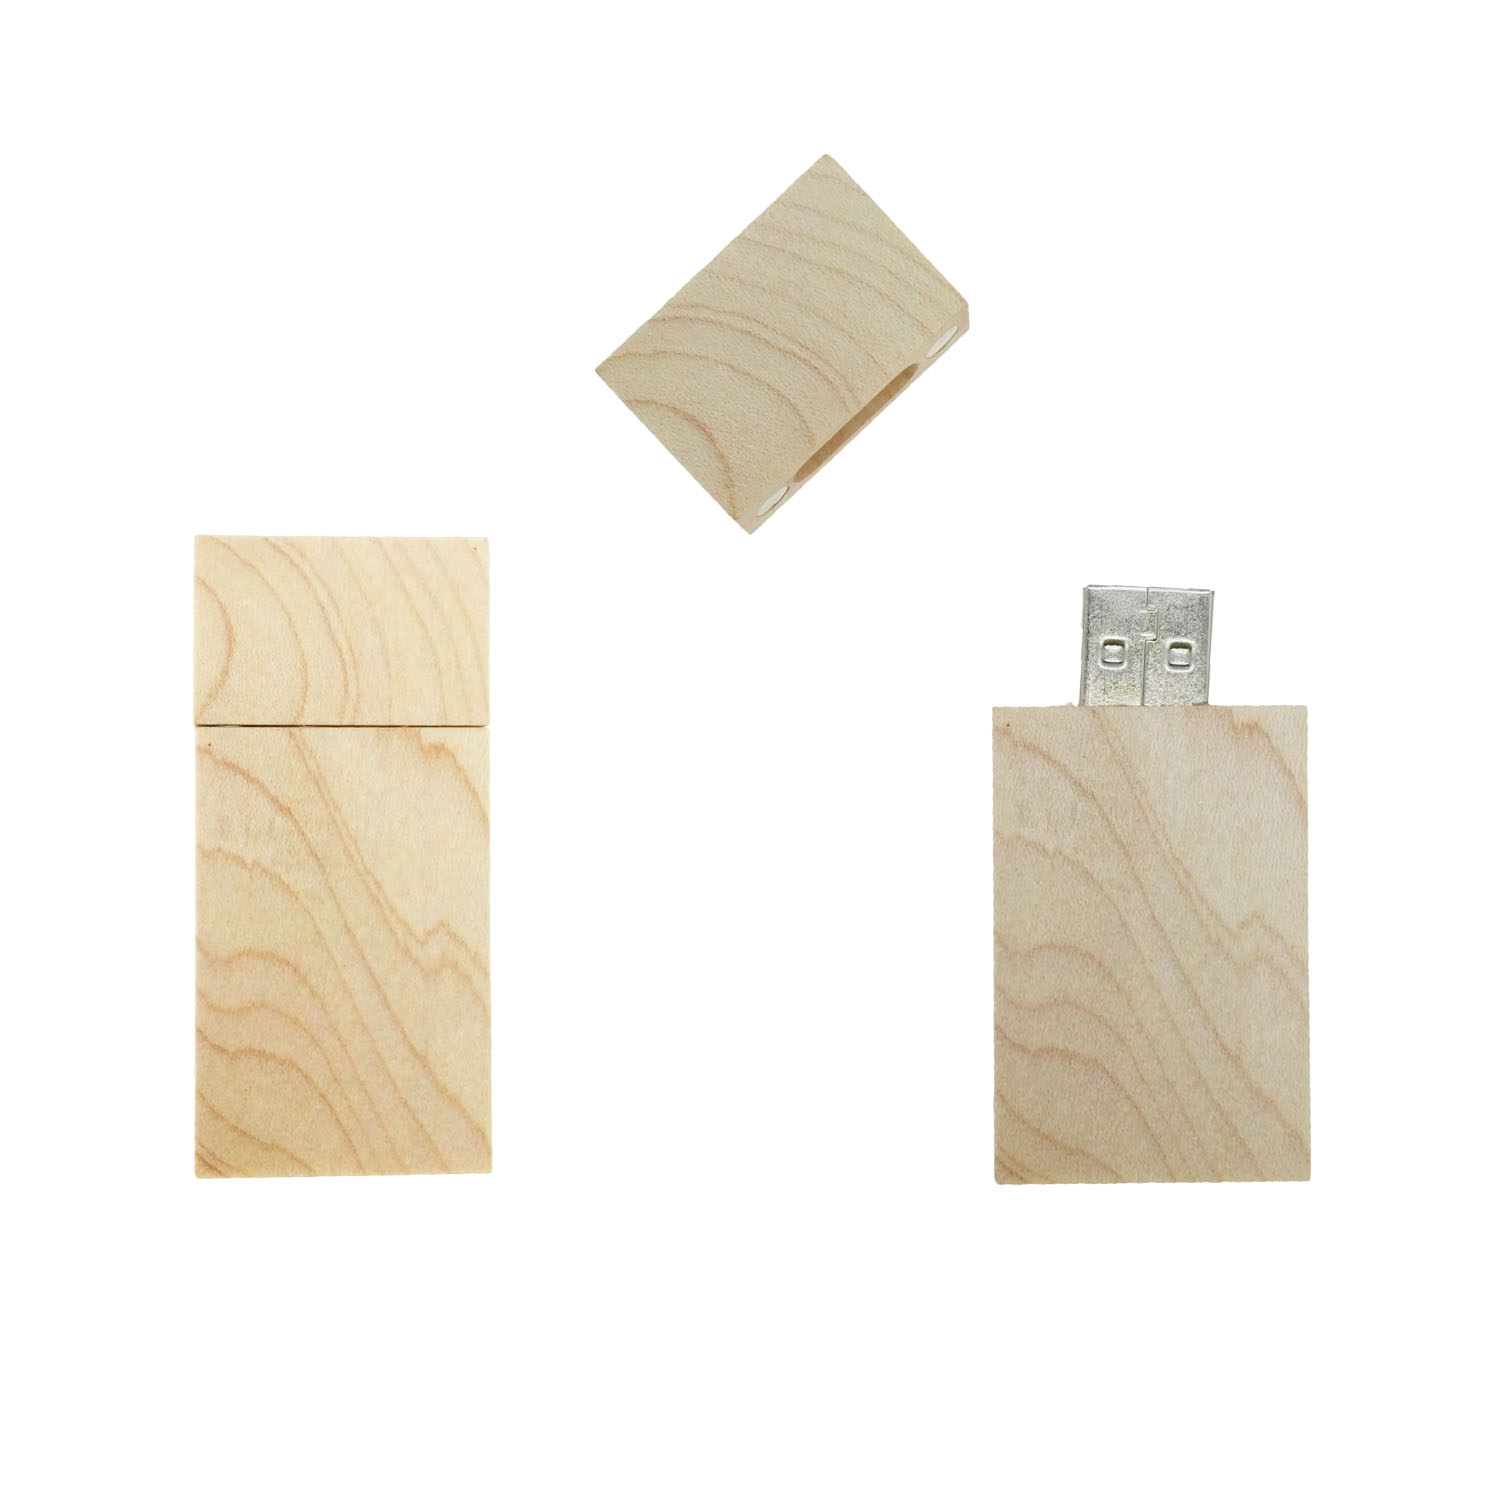 GL-AAA1180 Wooden Body 1 GB USB Flash Drive with Key Chain - 副本